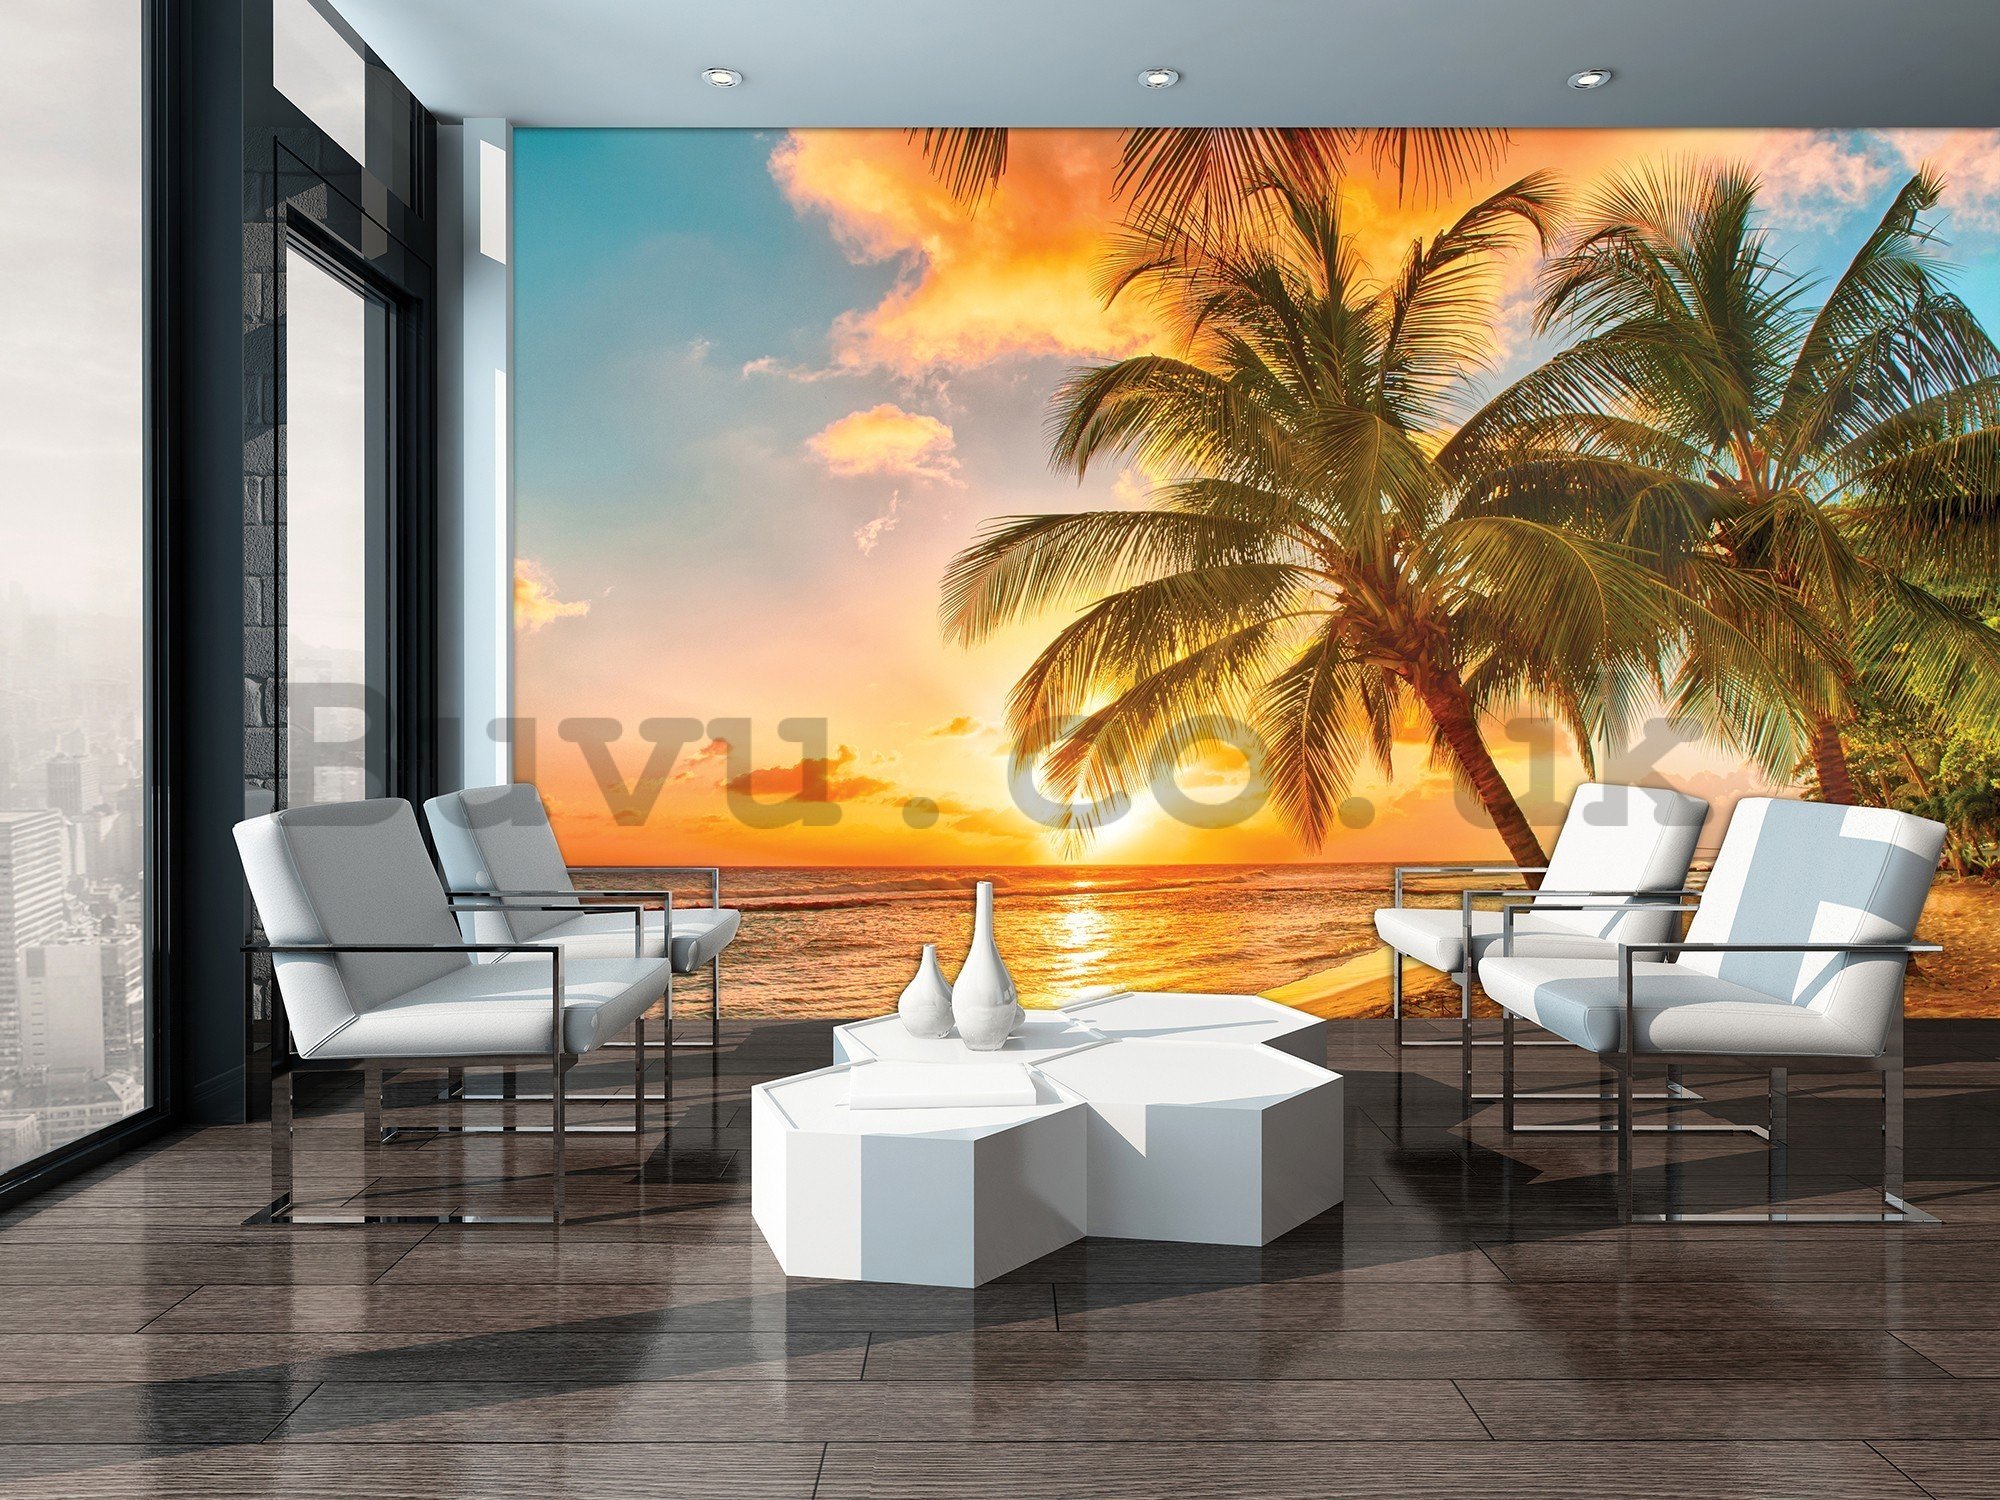 Wall mural vlies: Sunset in paradise - 416x254 cm